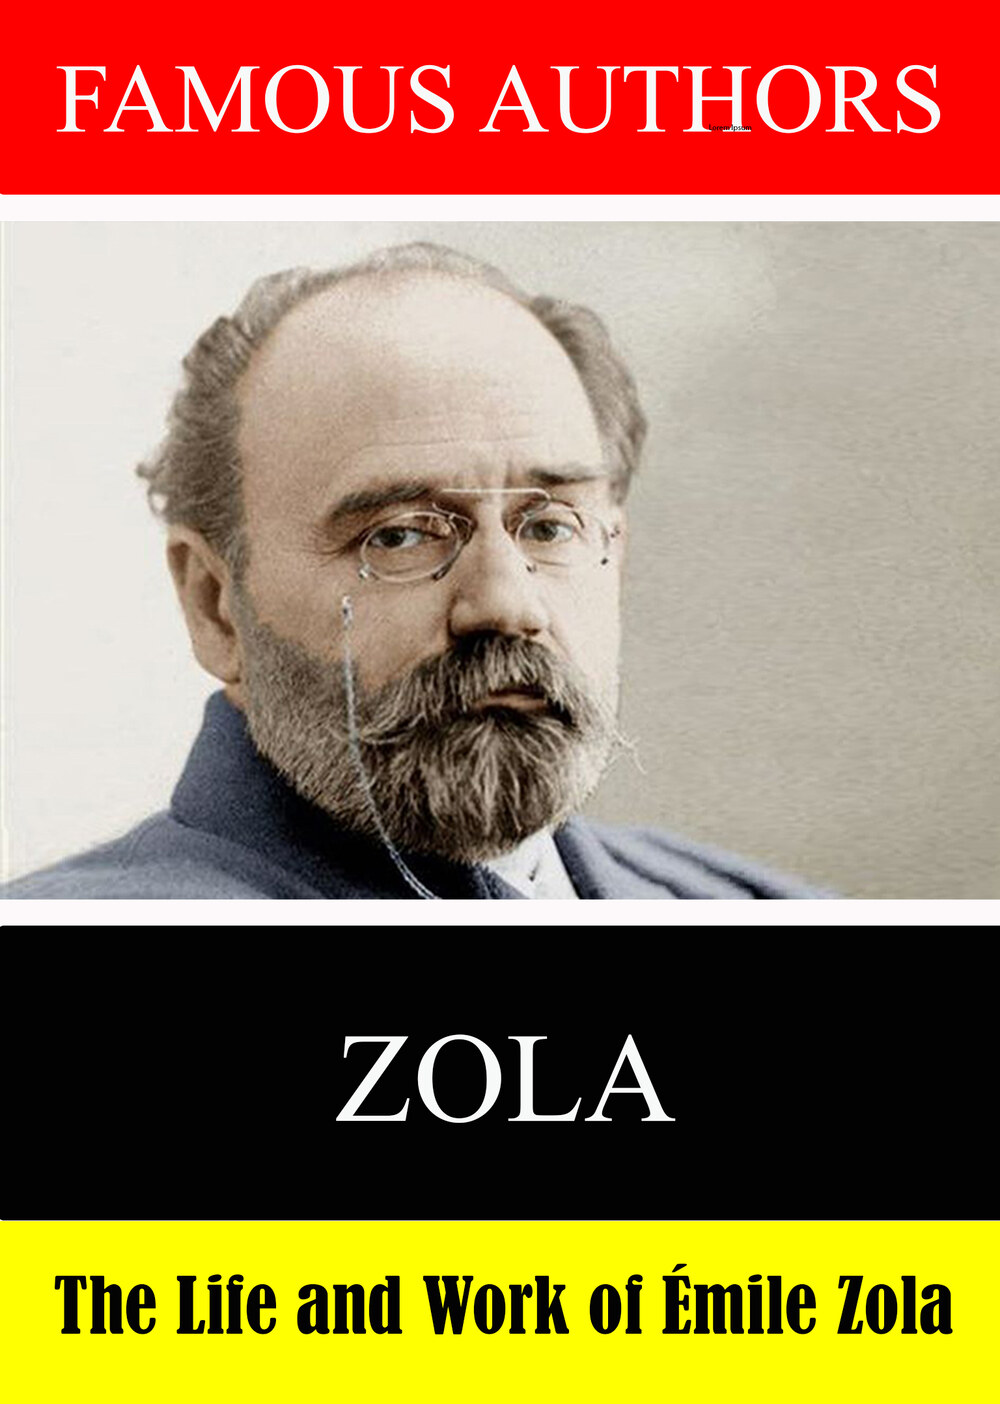 L7916 - Famous Authors: The Life and Work of Emile Zola